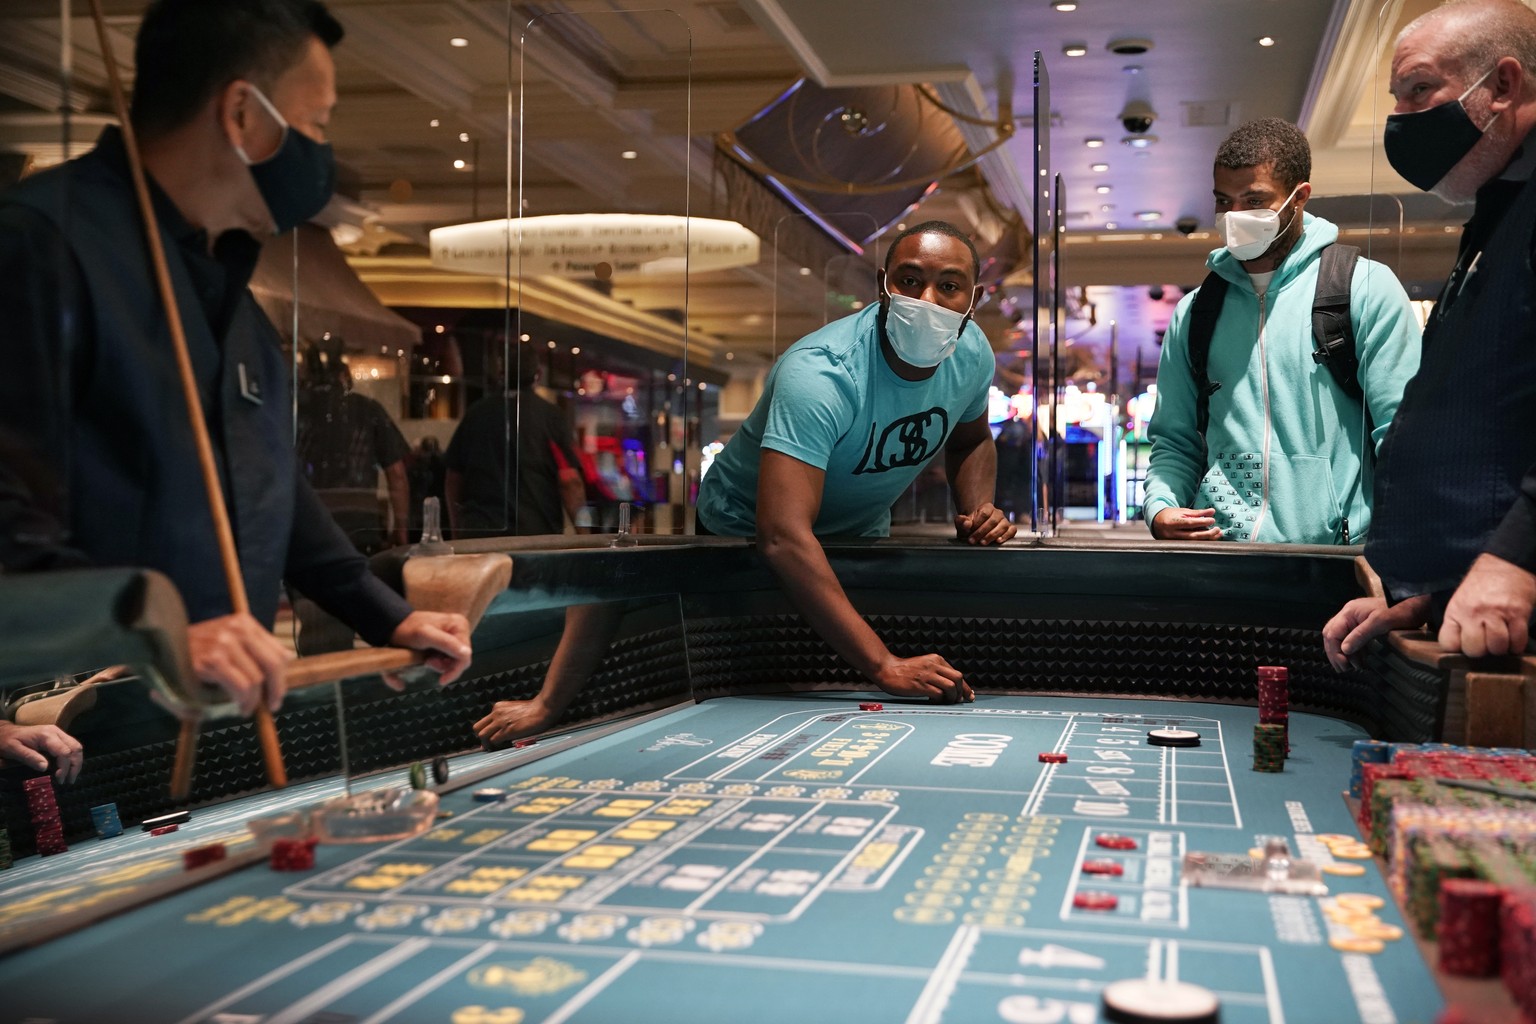 People play craps after the reopening of the Bellagio hotel and casino Thursday, June 4, 2020, in Las Vegas. Casinos in Nevada were allowed to reopen on Thursday for the first time after temporary clo ...